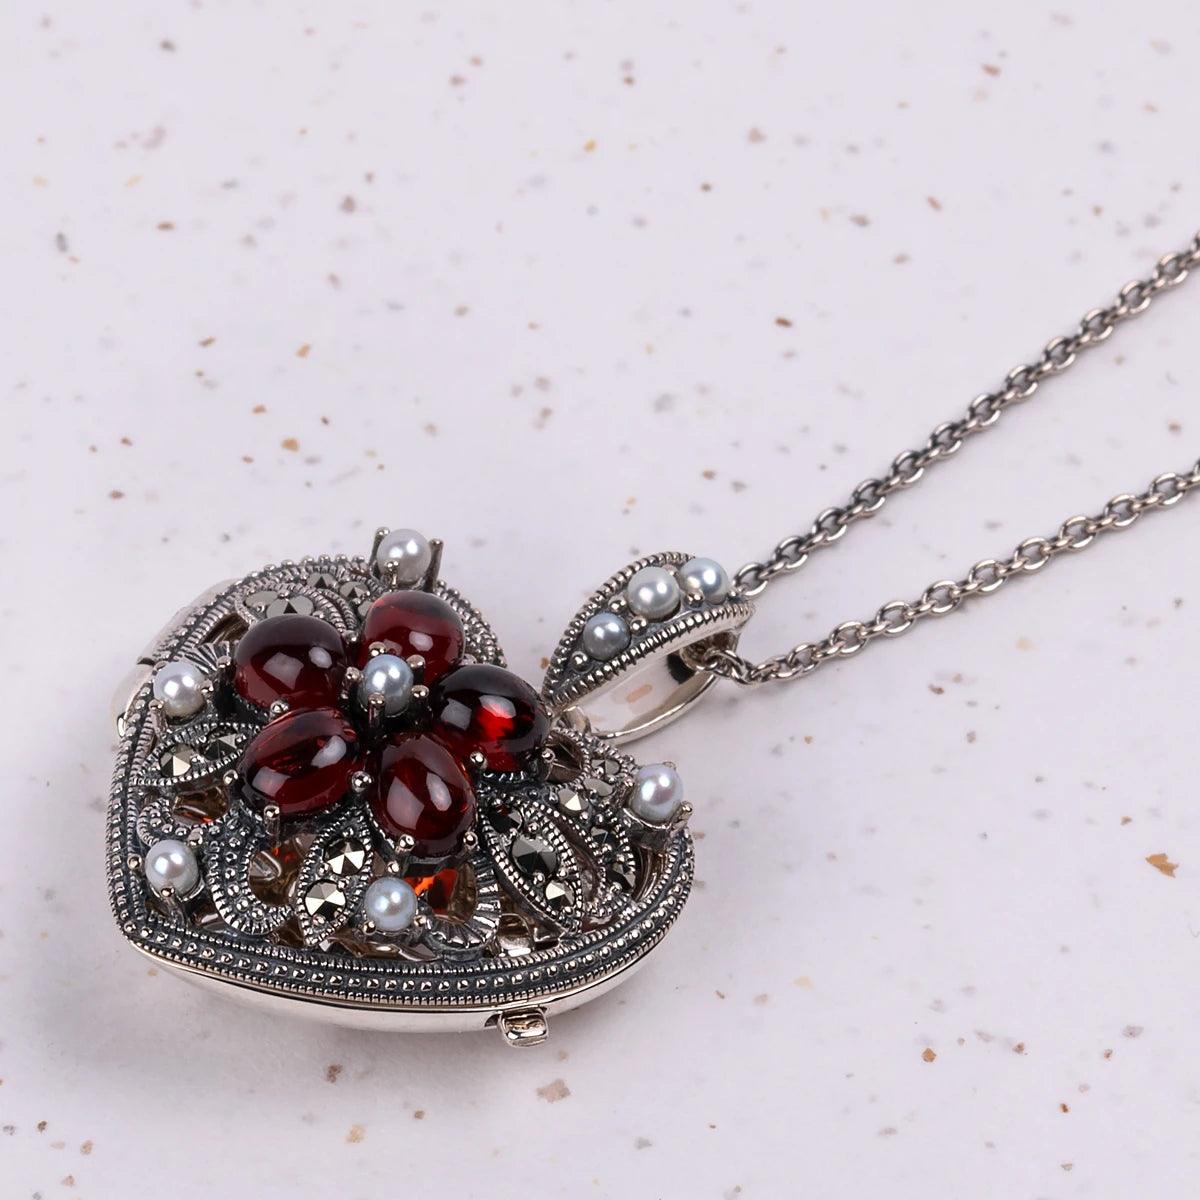 Silver heart shaped pendant with pyrope, garnet